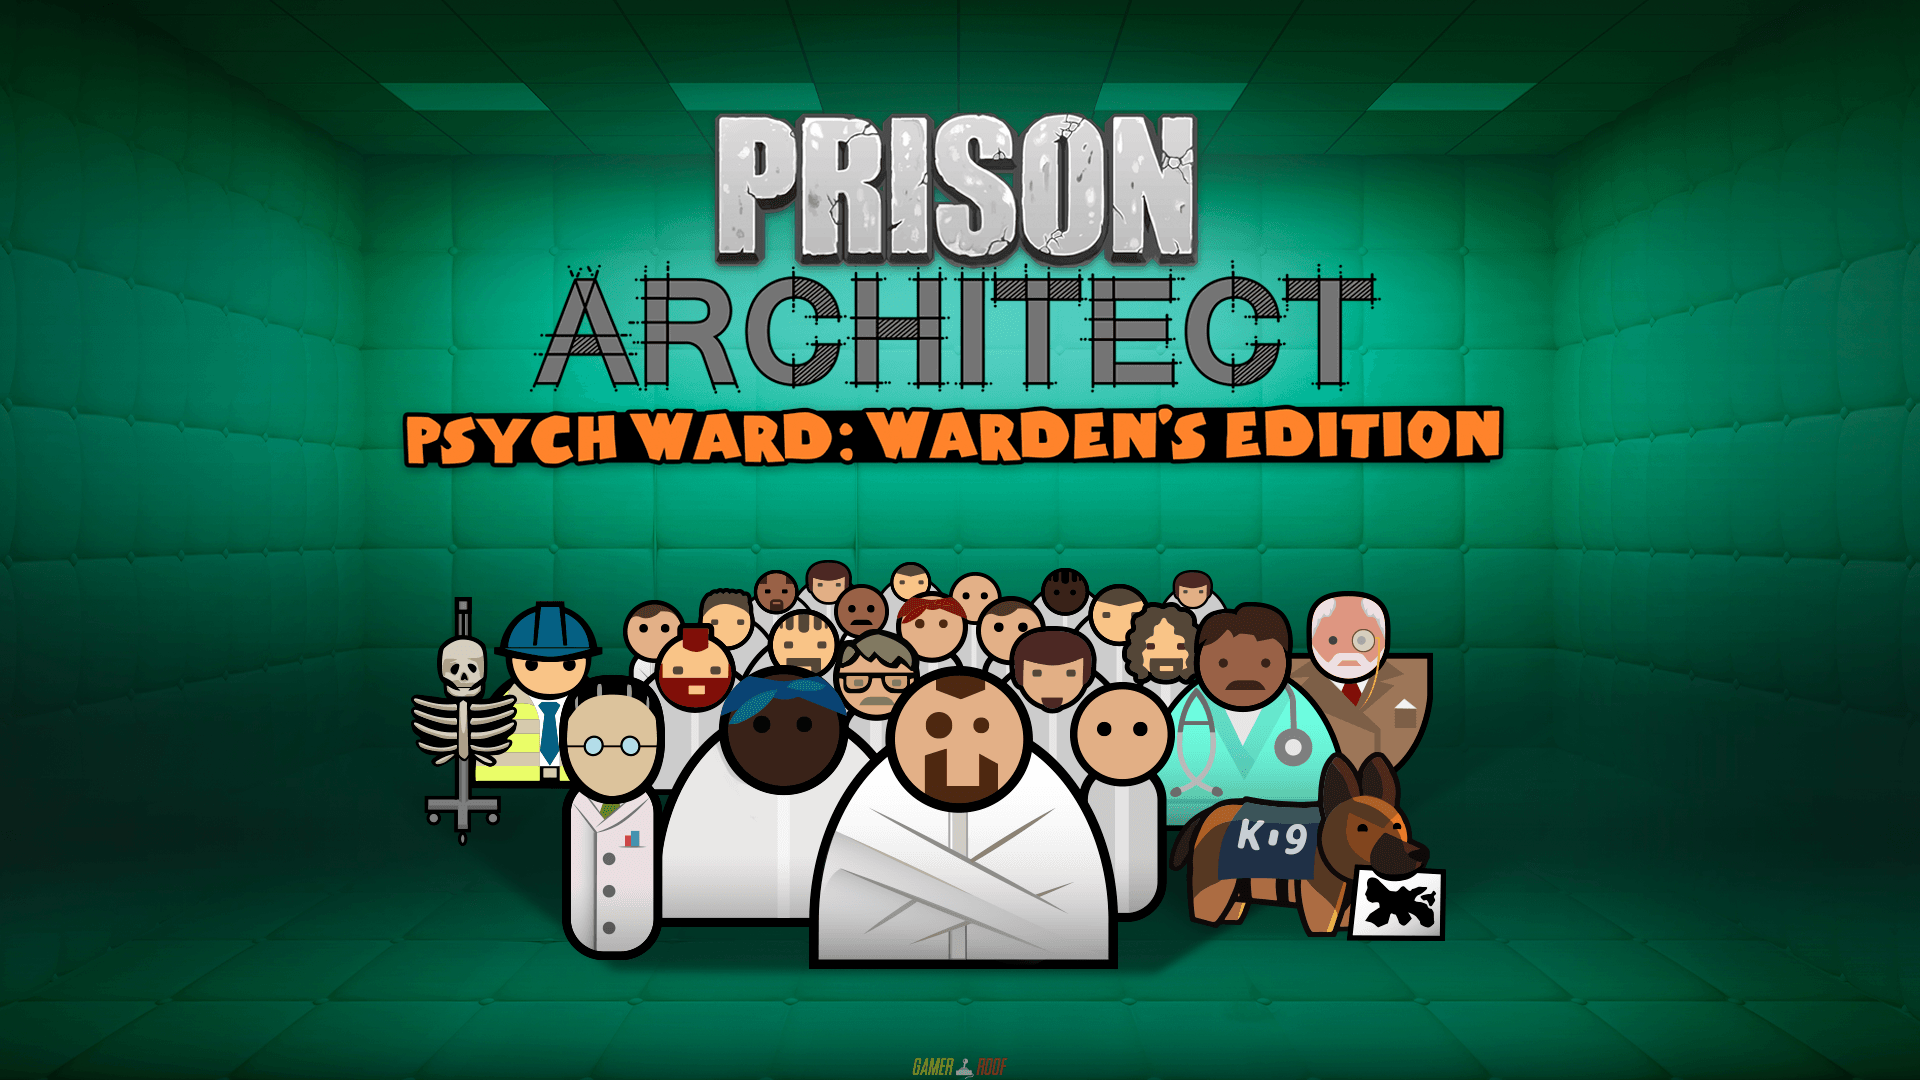 Prison Architect Psych Ward Warden's Edition Nintendo Switch Version Full Game Free Download